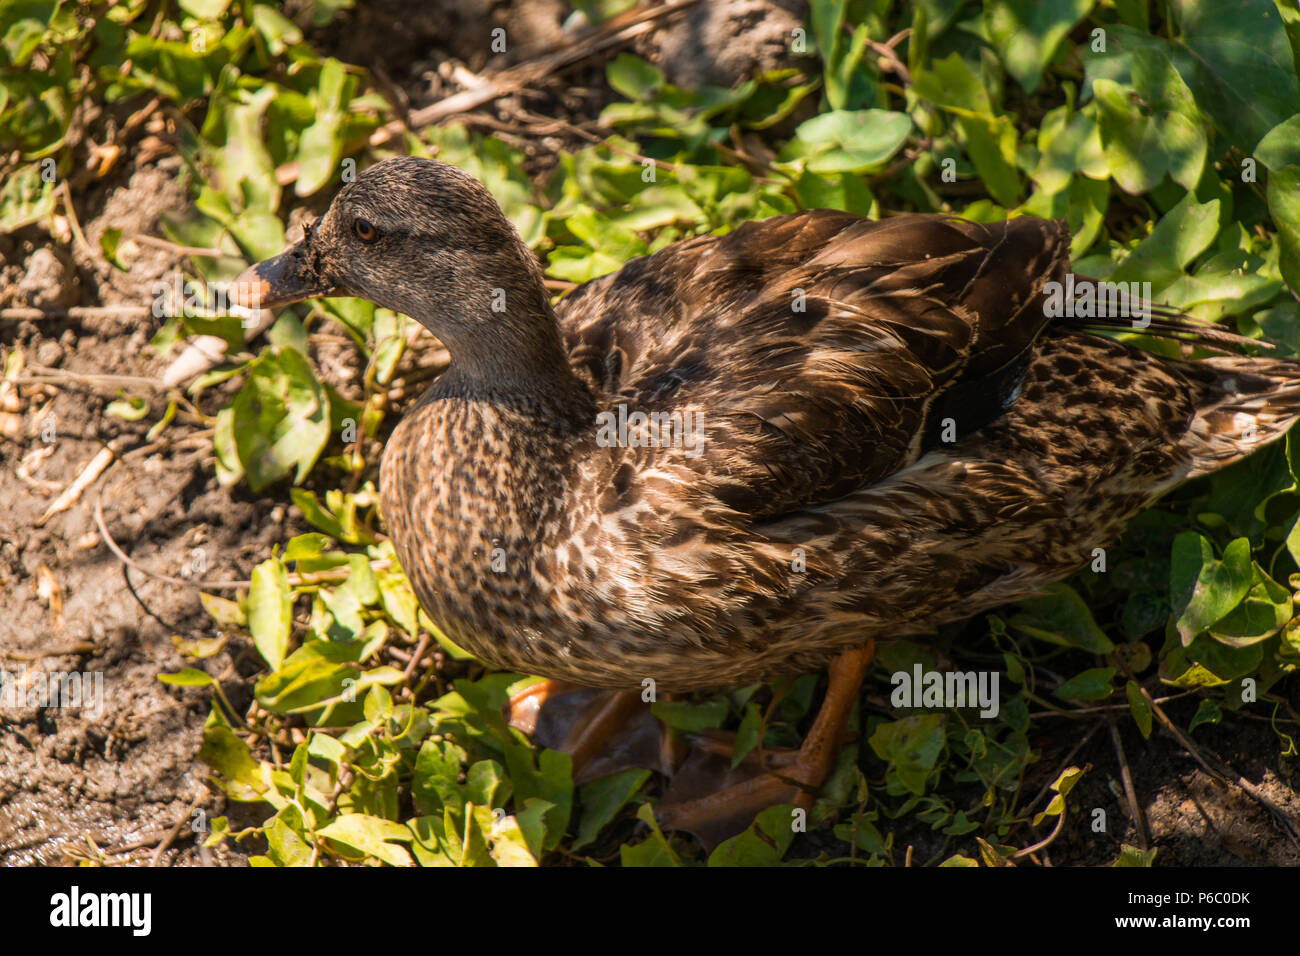 A young duck hidding scene Stock Photo